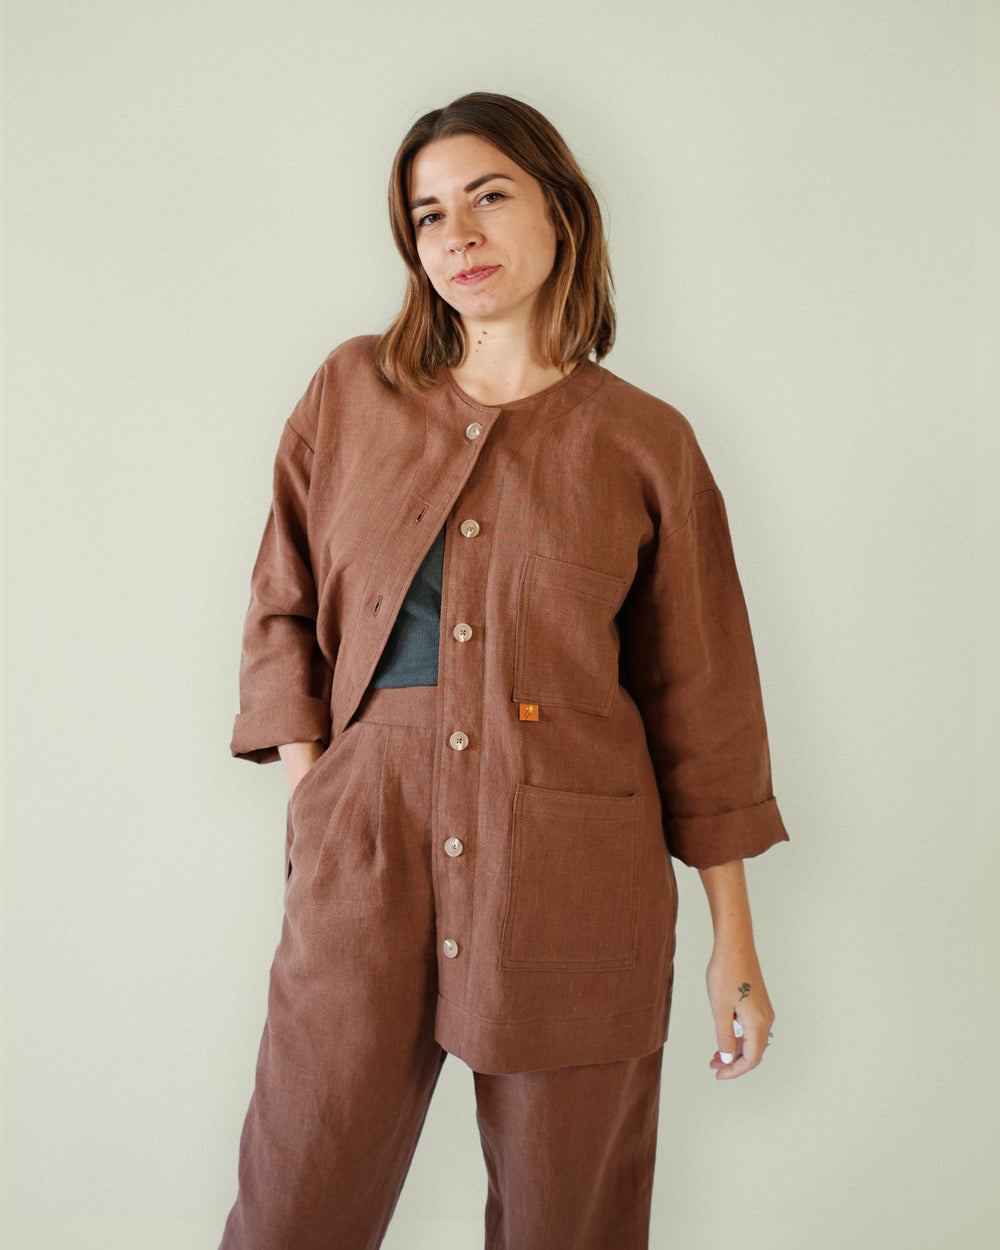 Woman wearing the Makers Over Shirt sewing pattern from Matchy Matchy on The Fold Line. An over shirt pattern made in light to medium weight woven fabrics, featuring a boxy silhouette, wide shoulder line, multiple pockets, front button placket, below hip 